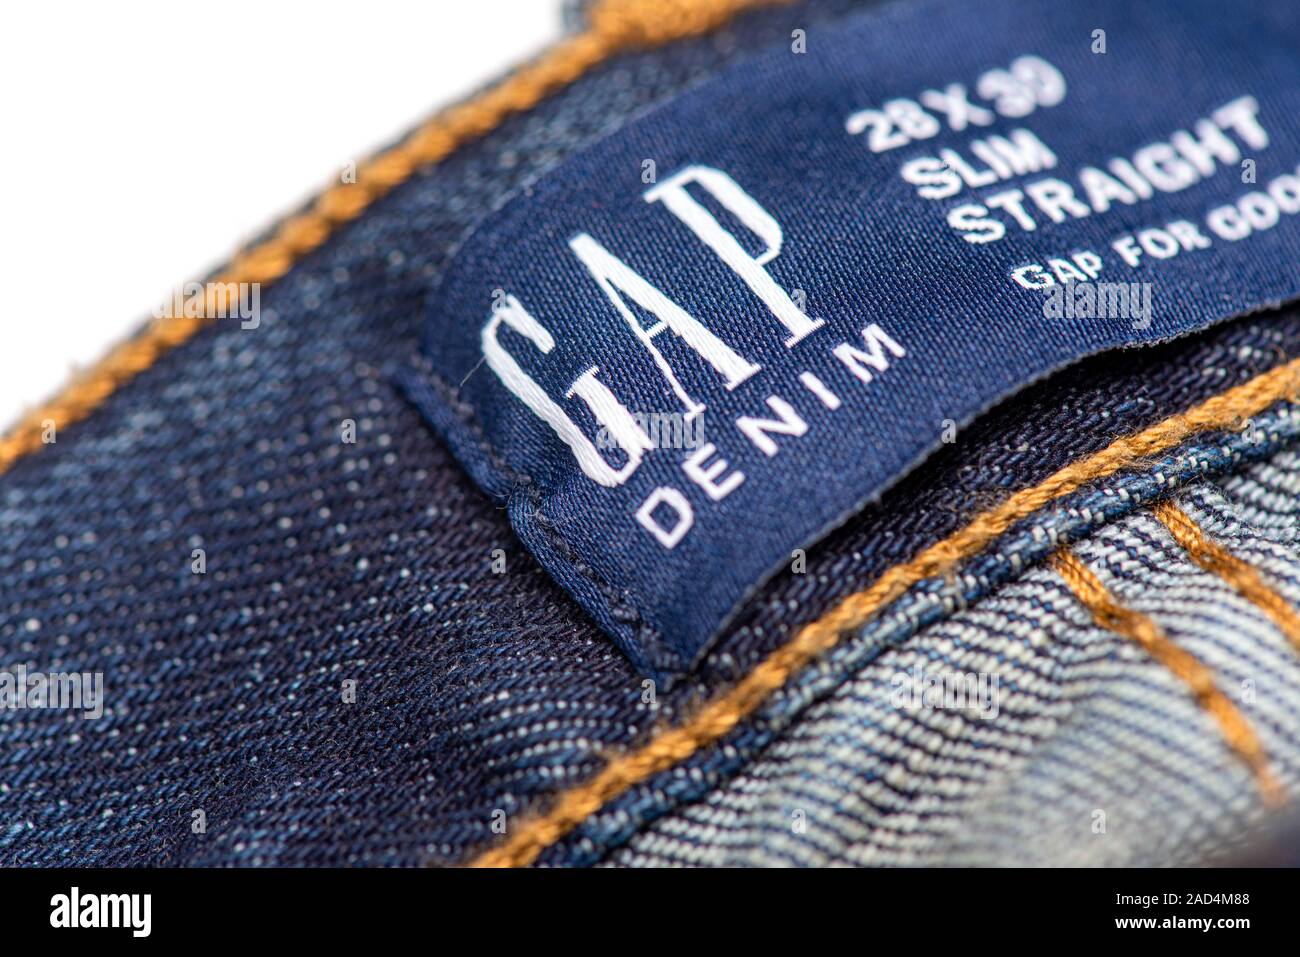 Gap Clothes Store High Resolution Stock Photography and Images - Alamy